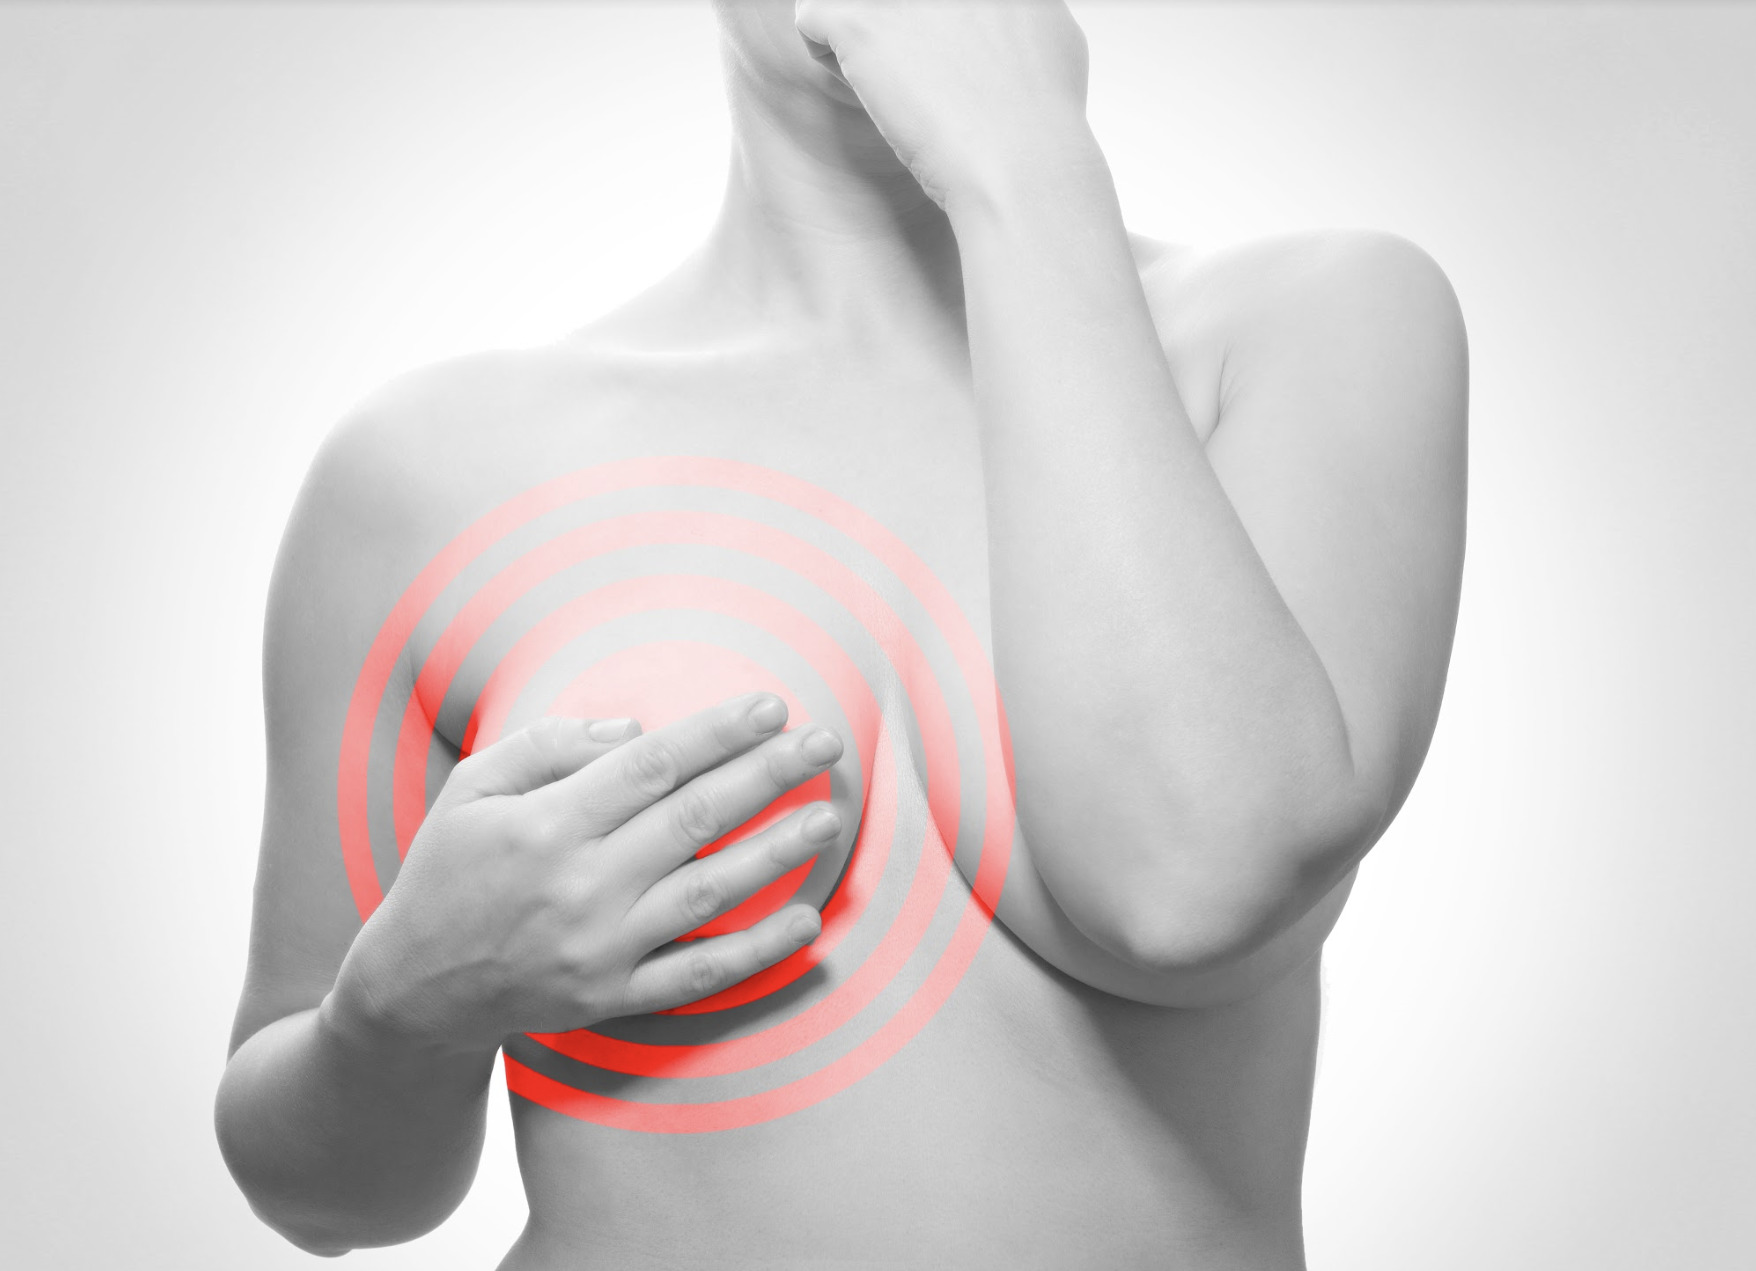 Nipple cancer: how is it manifested, diagnosed and treated?